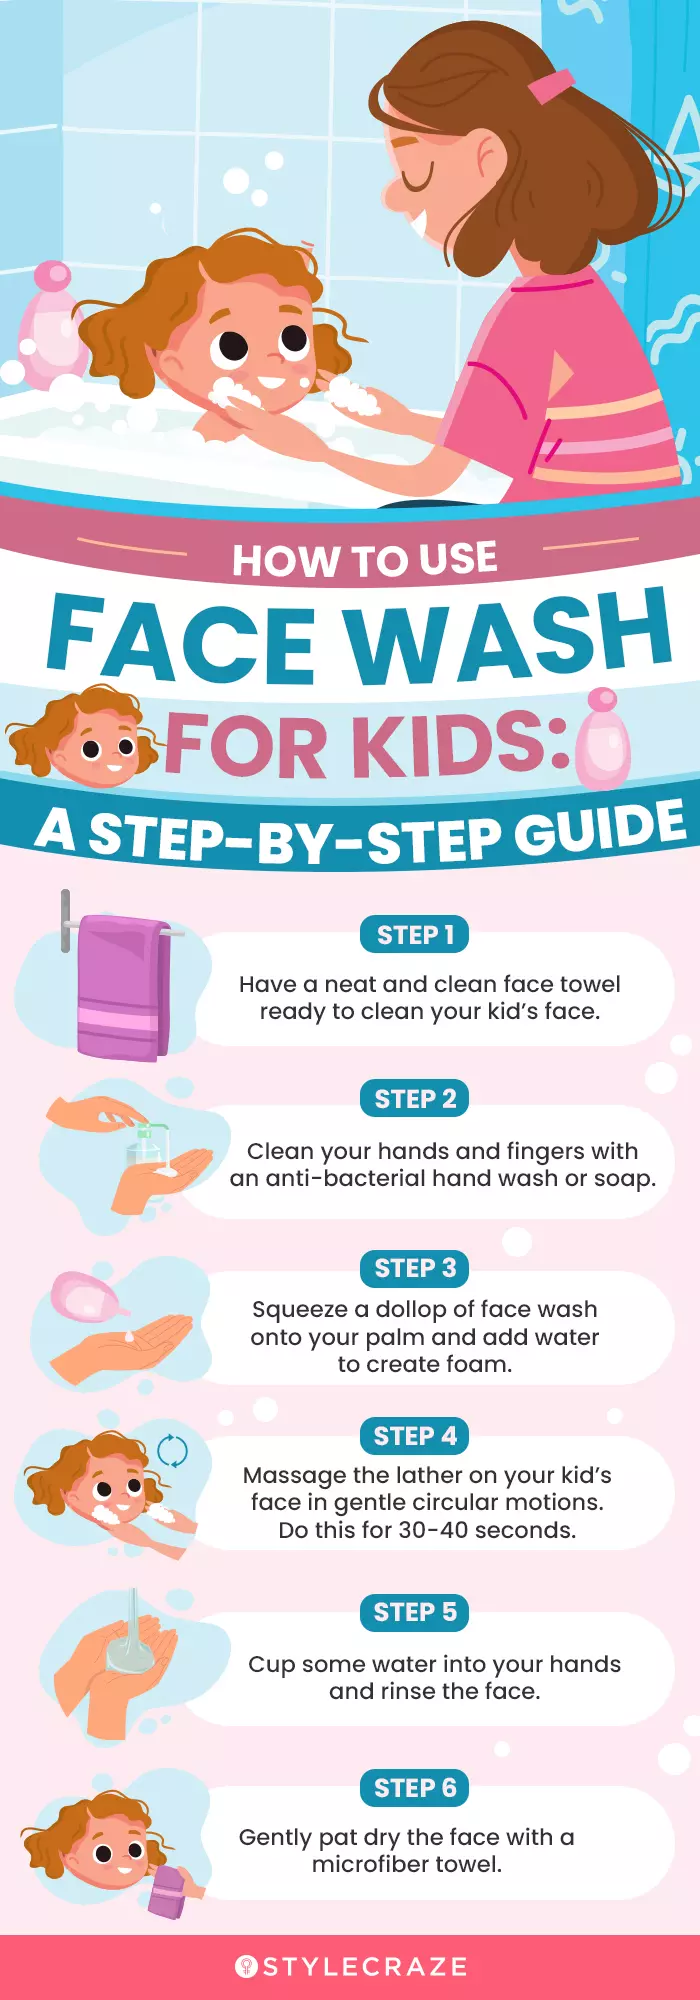 By Step Guide On How To Use Face Wash For Kids (infographic)